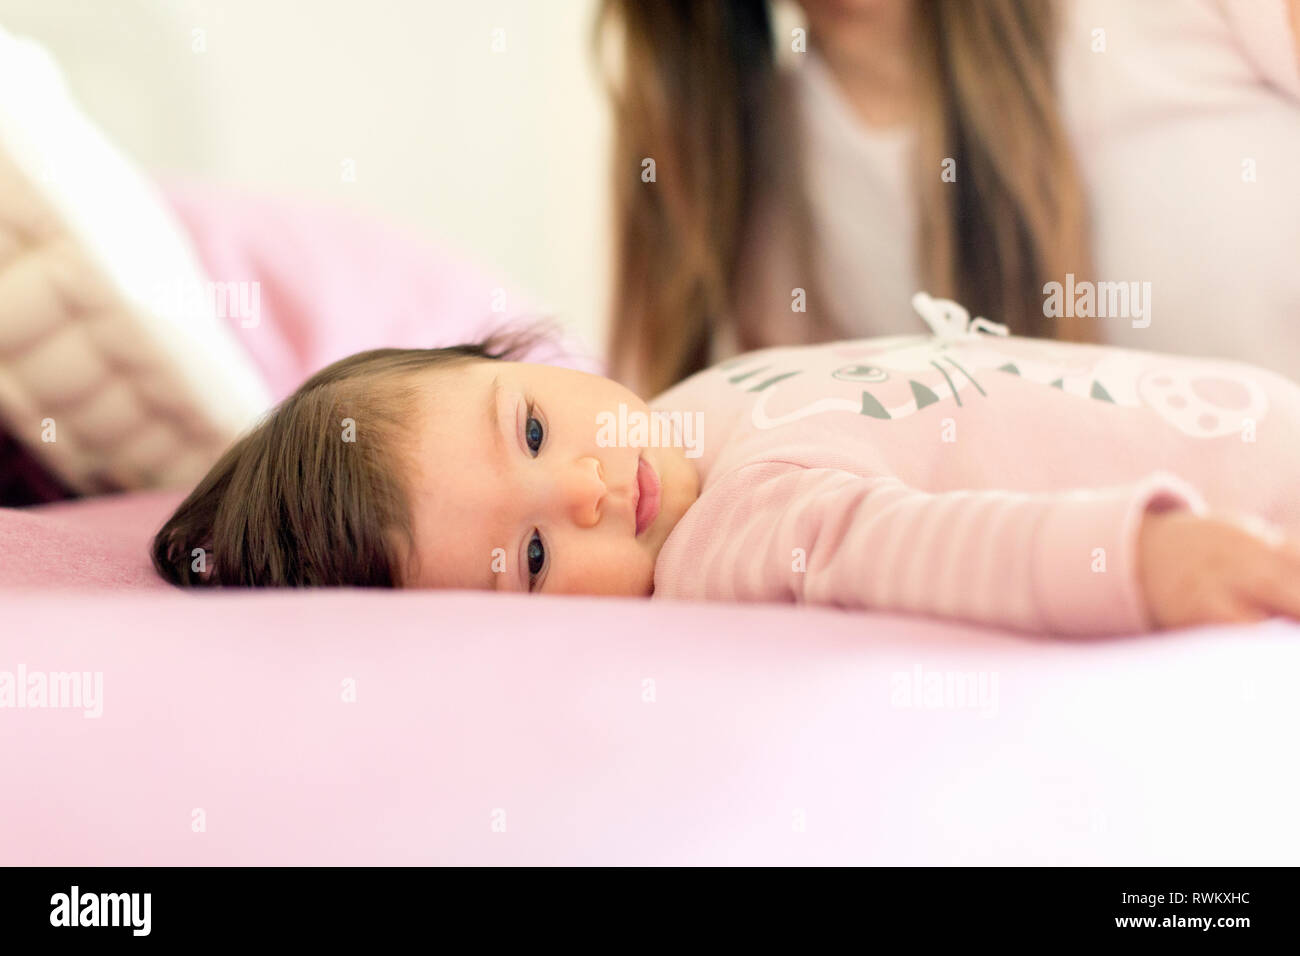 Baby girl lying down on bed Stock Photo